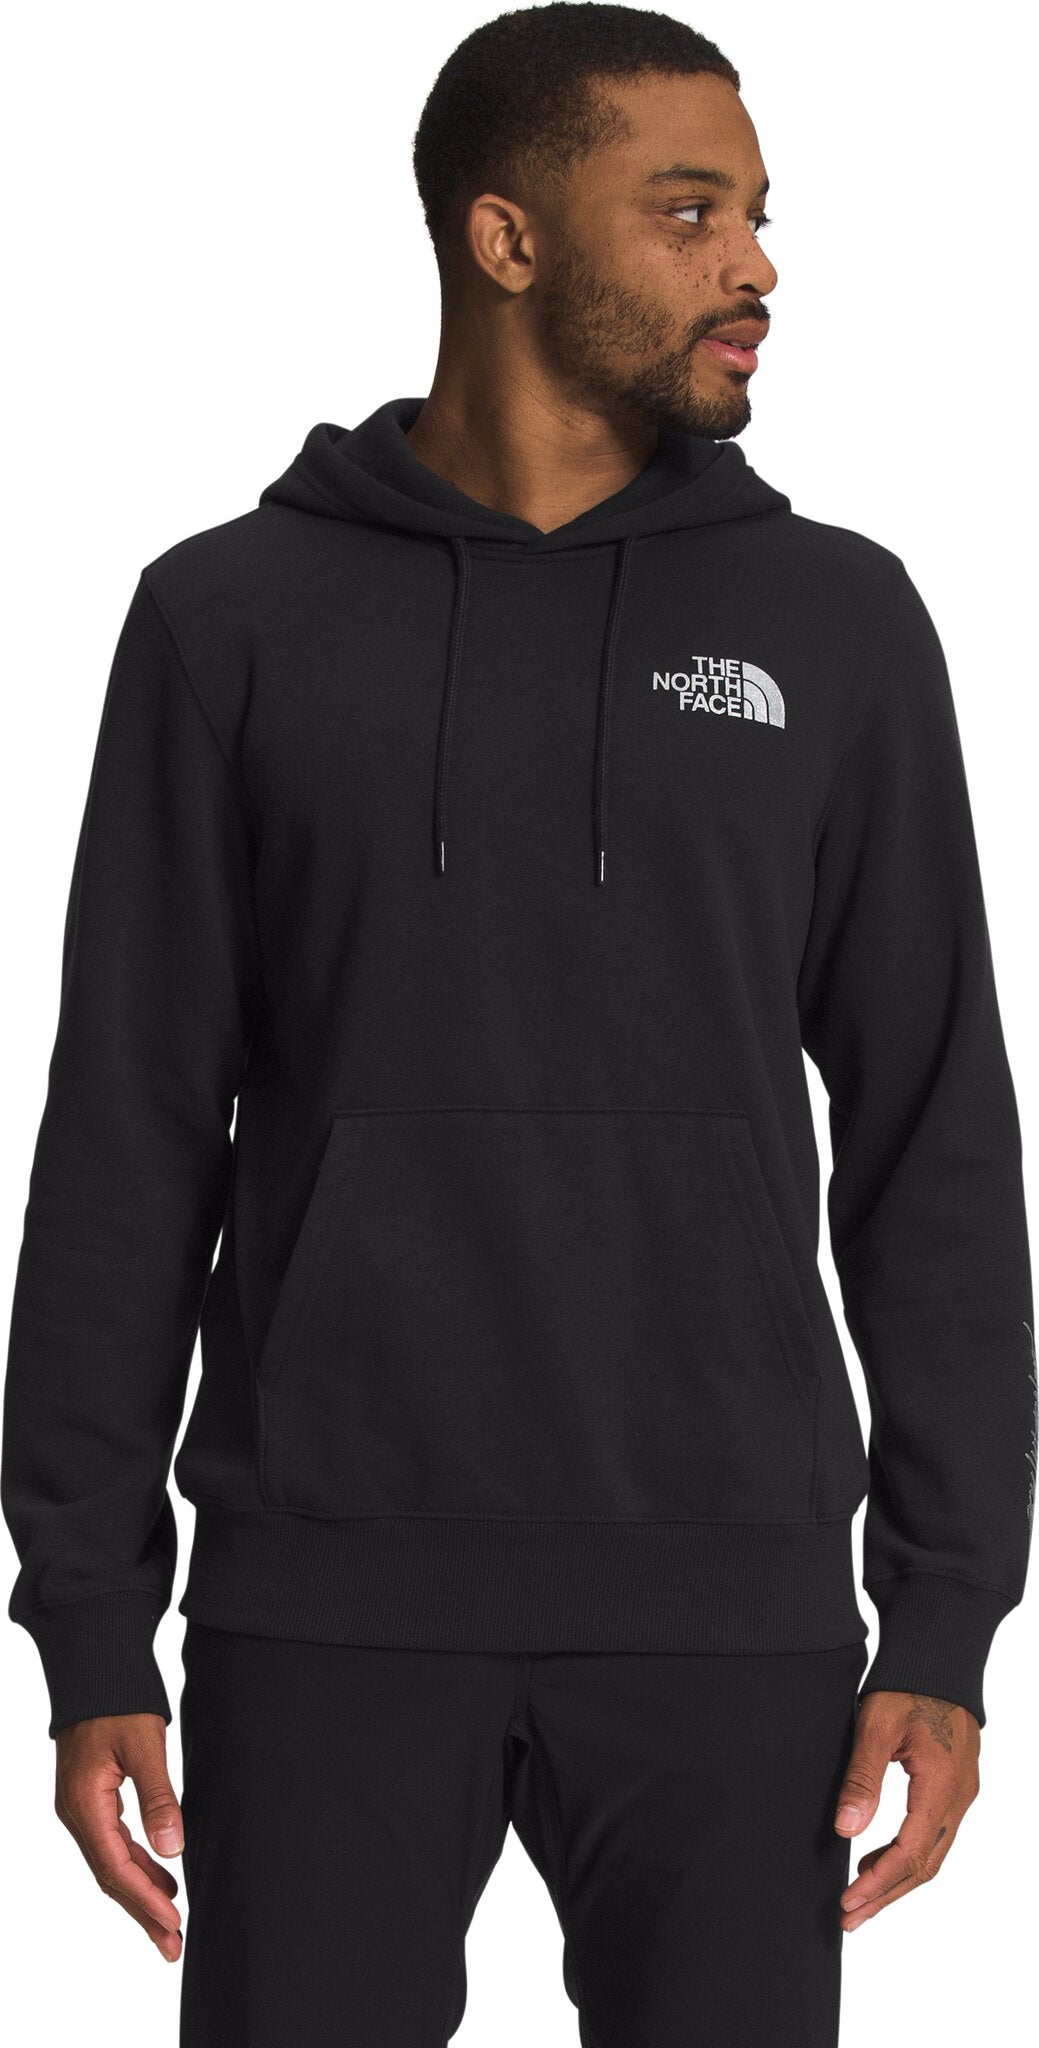 The North Face Graphic Injection Hoodie - Men’s | Altitude Sports